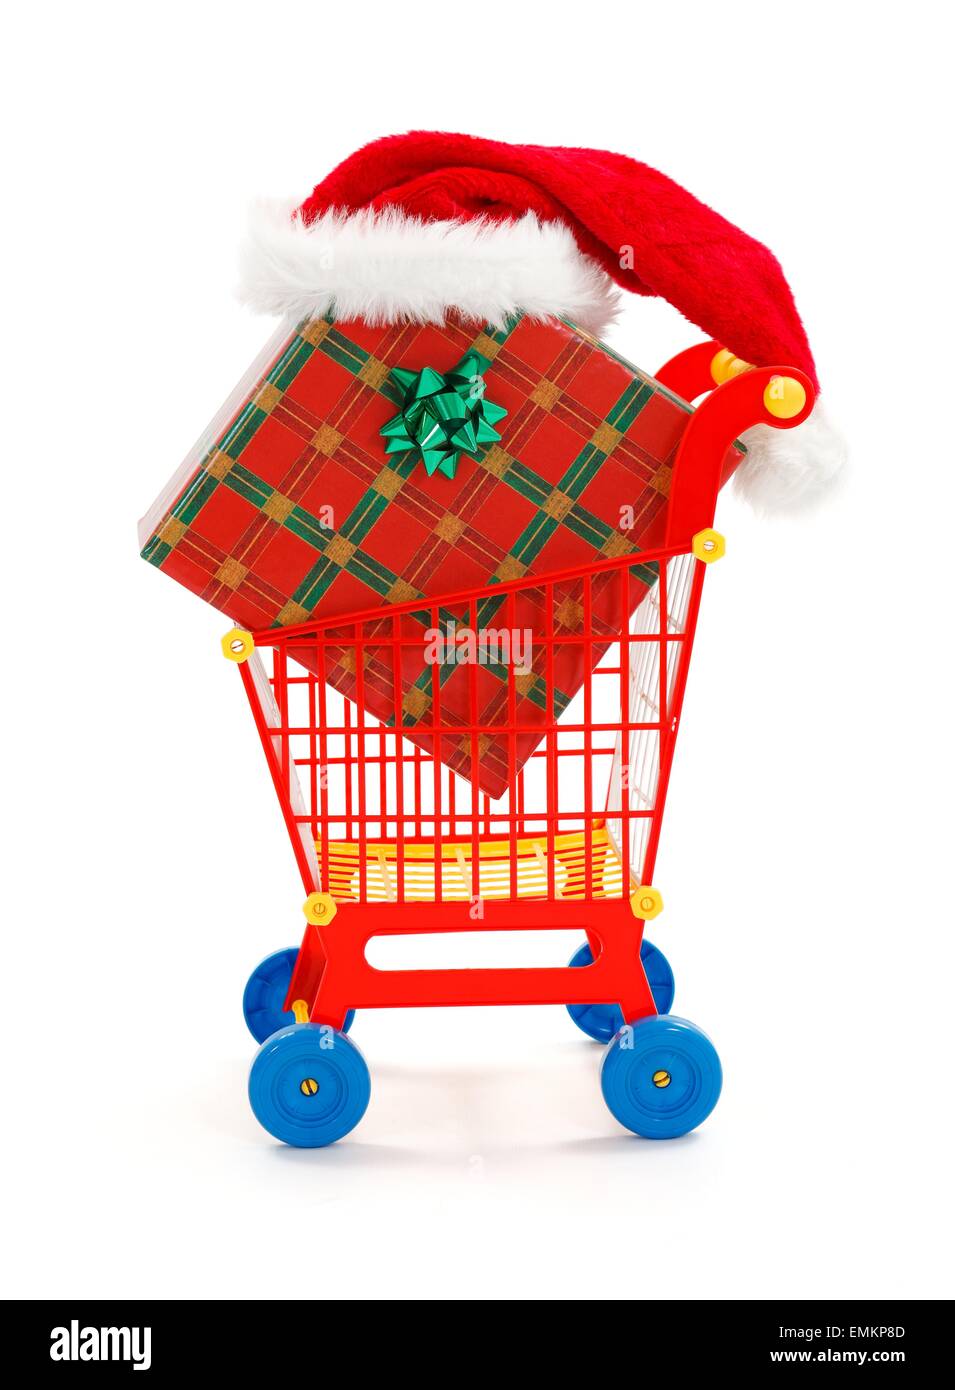 Toy shopping cart with big Christmas present, Santa hat on the box Stock Photo